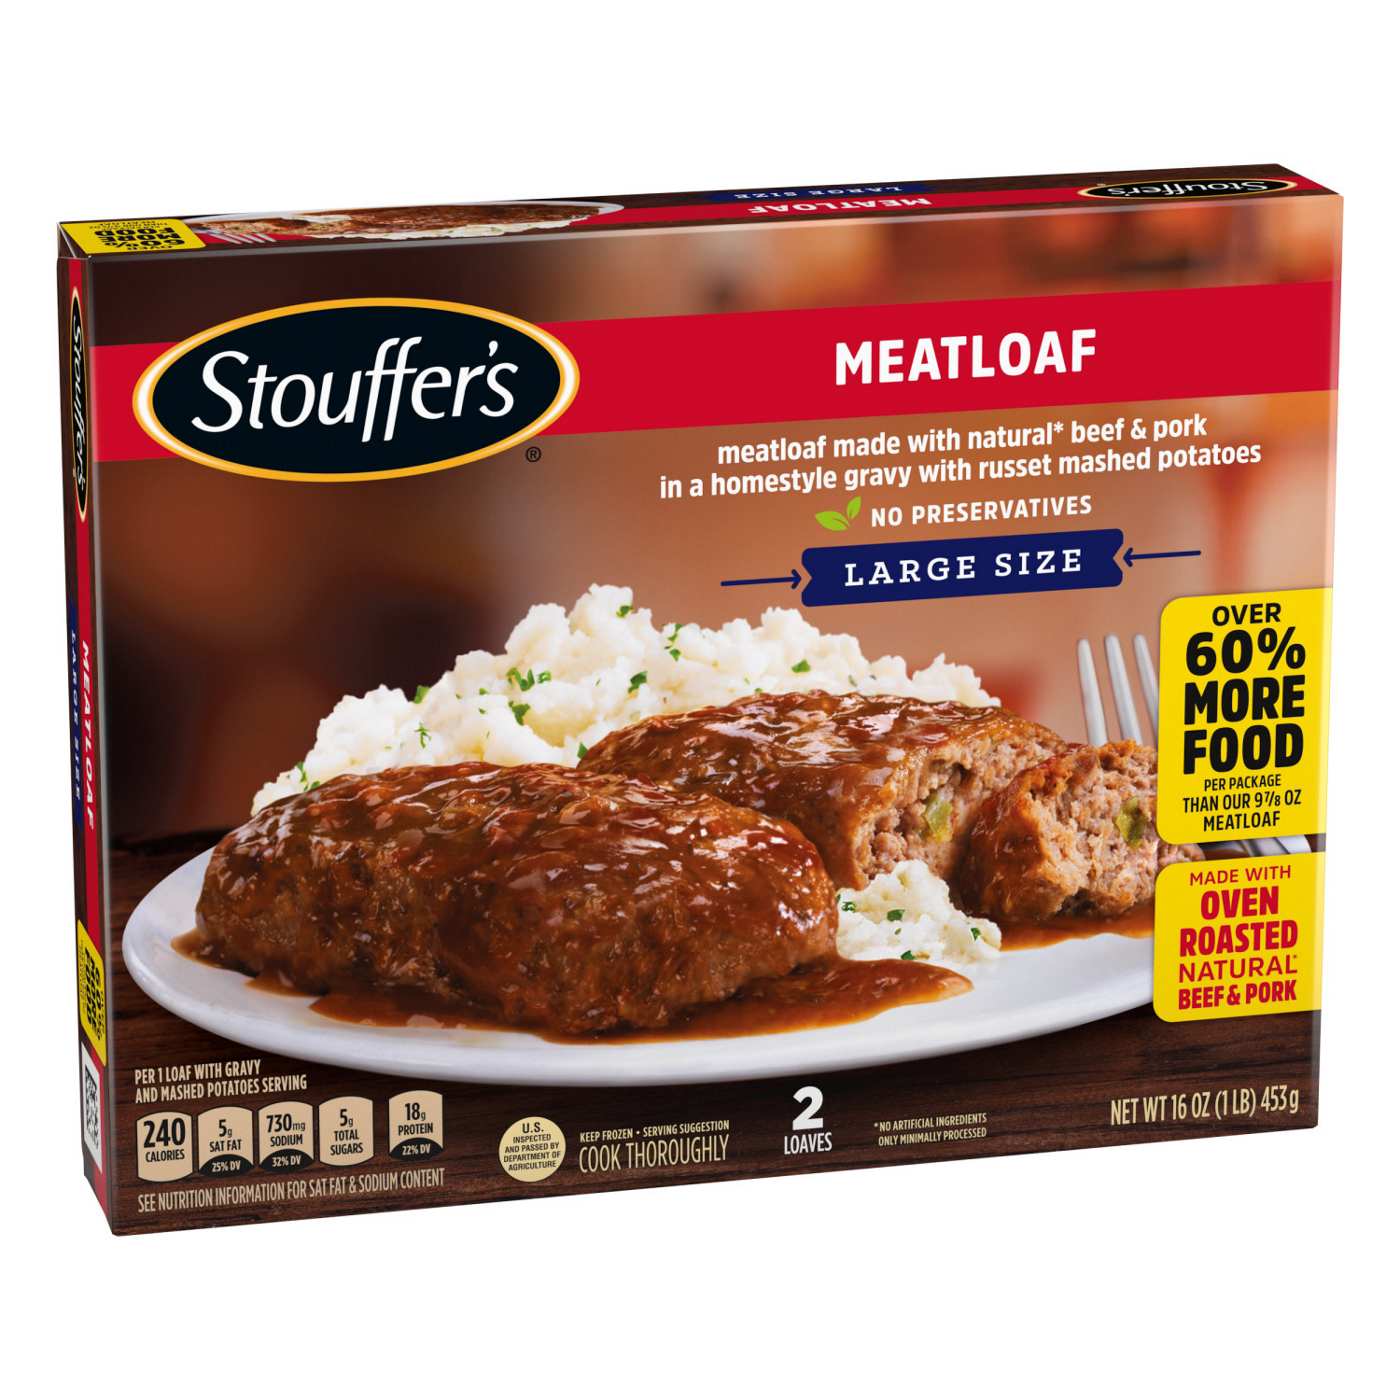 Stouffer's Meatloaf & Mashed Potatoes Frozen Meal - Large Size; image 2 of 7